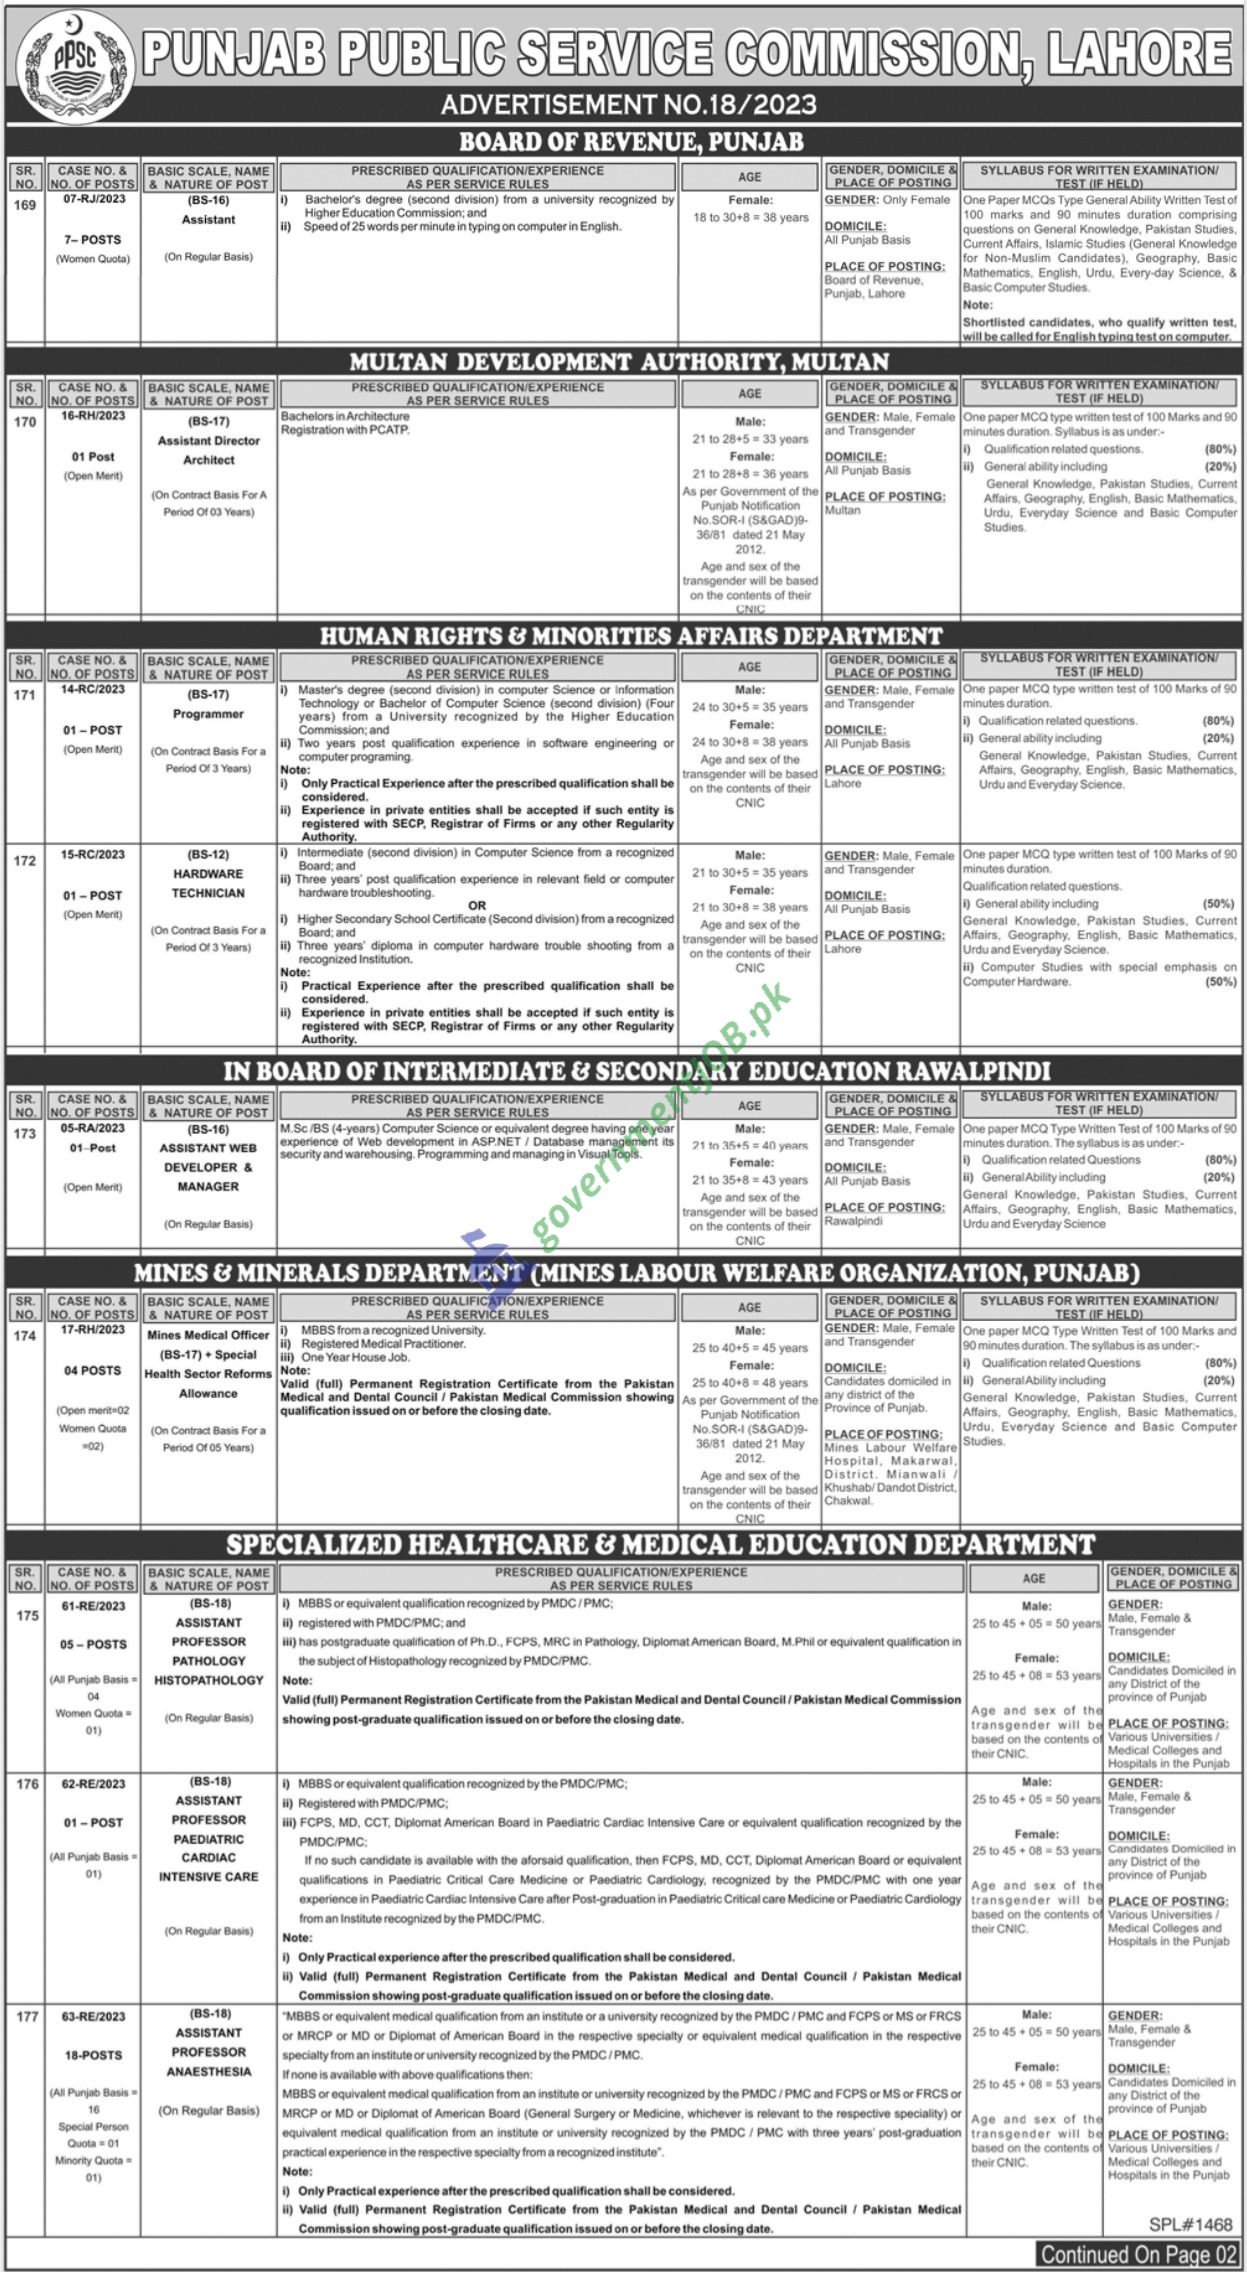 PPSC Jobs 2023 Apply Online, AD No. 18-2023